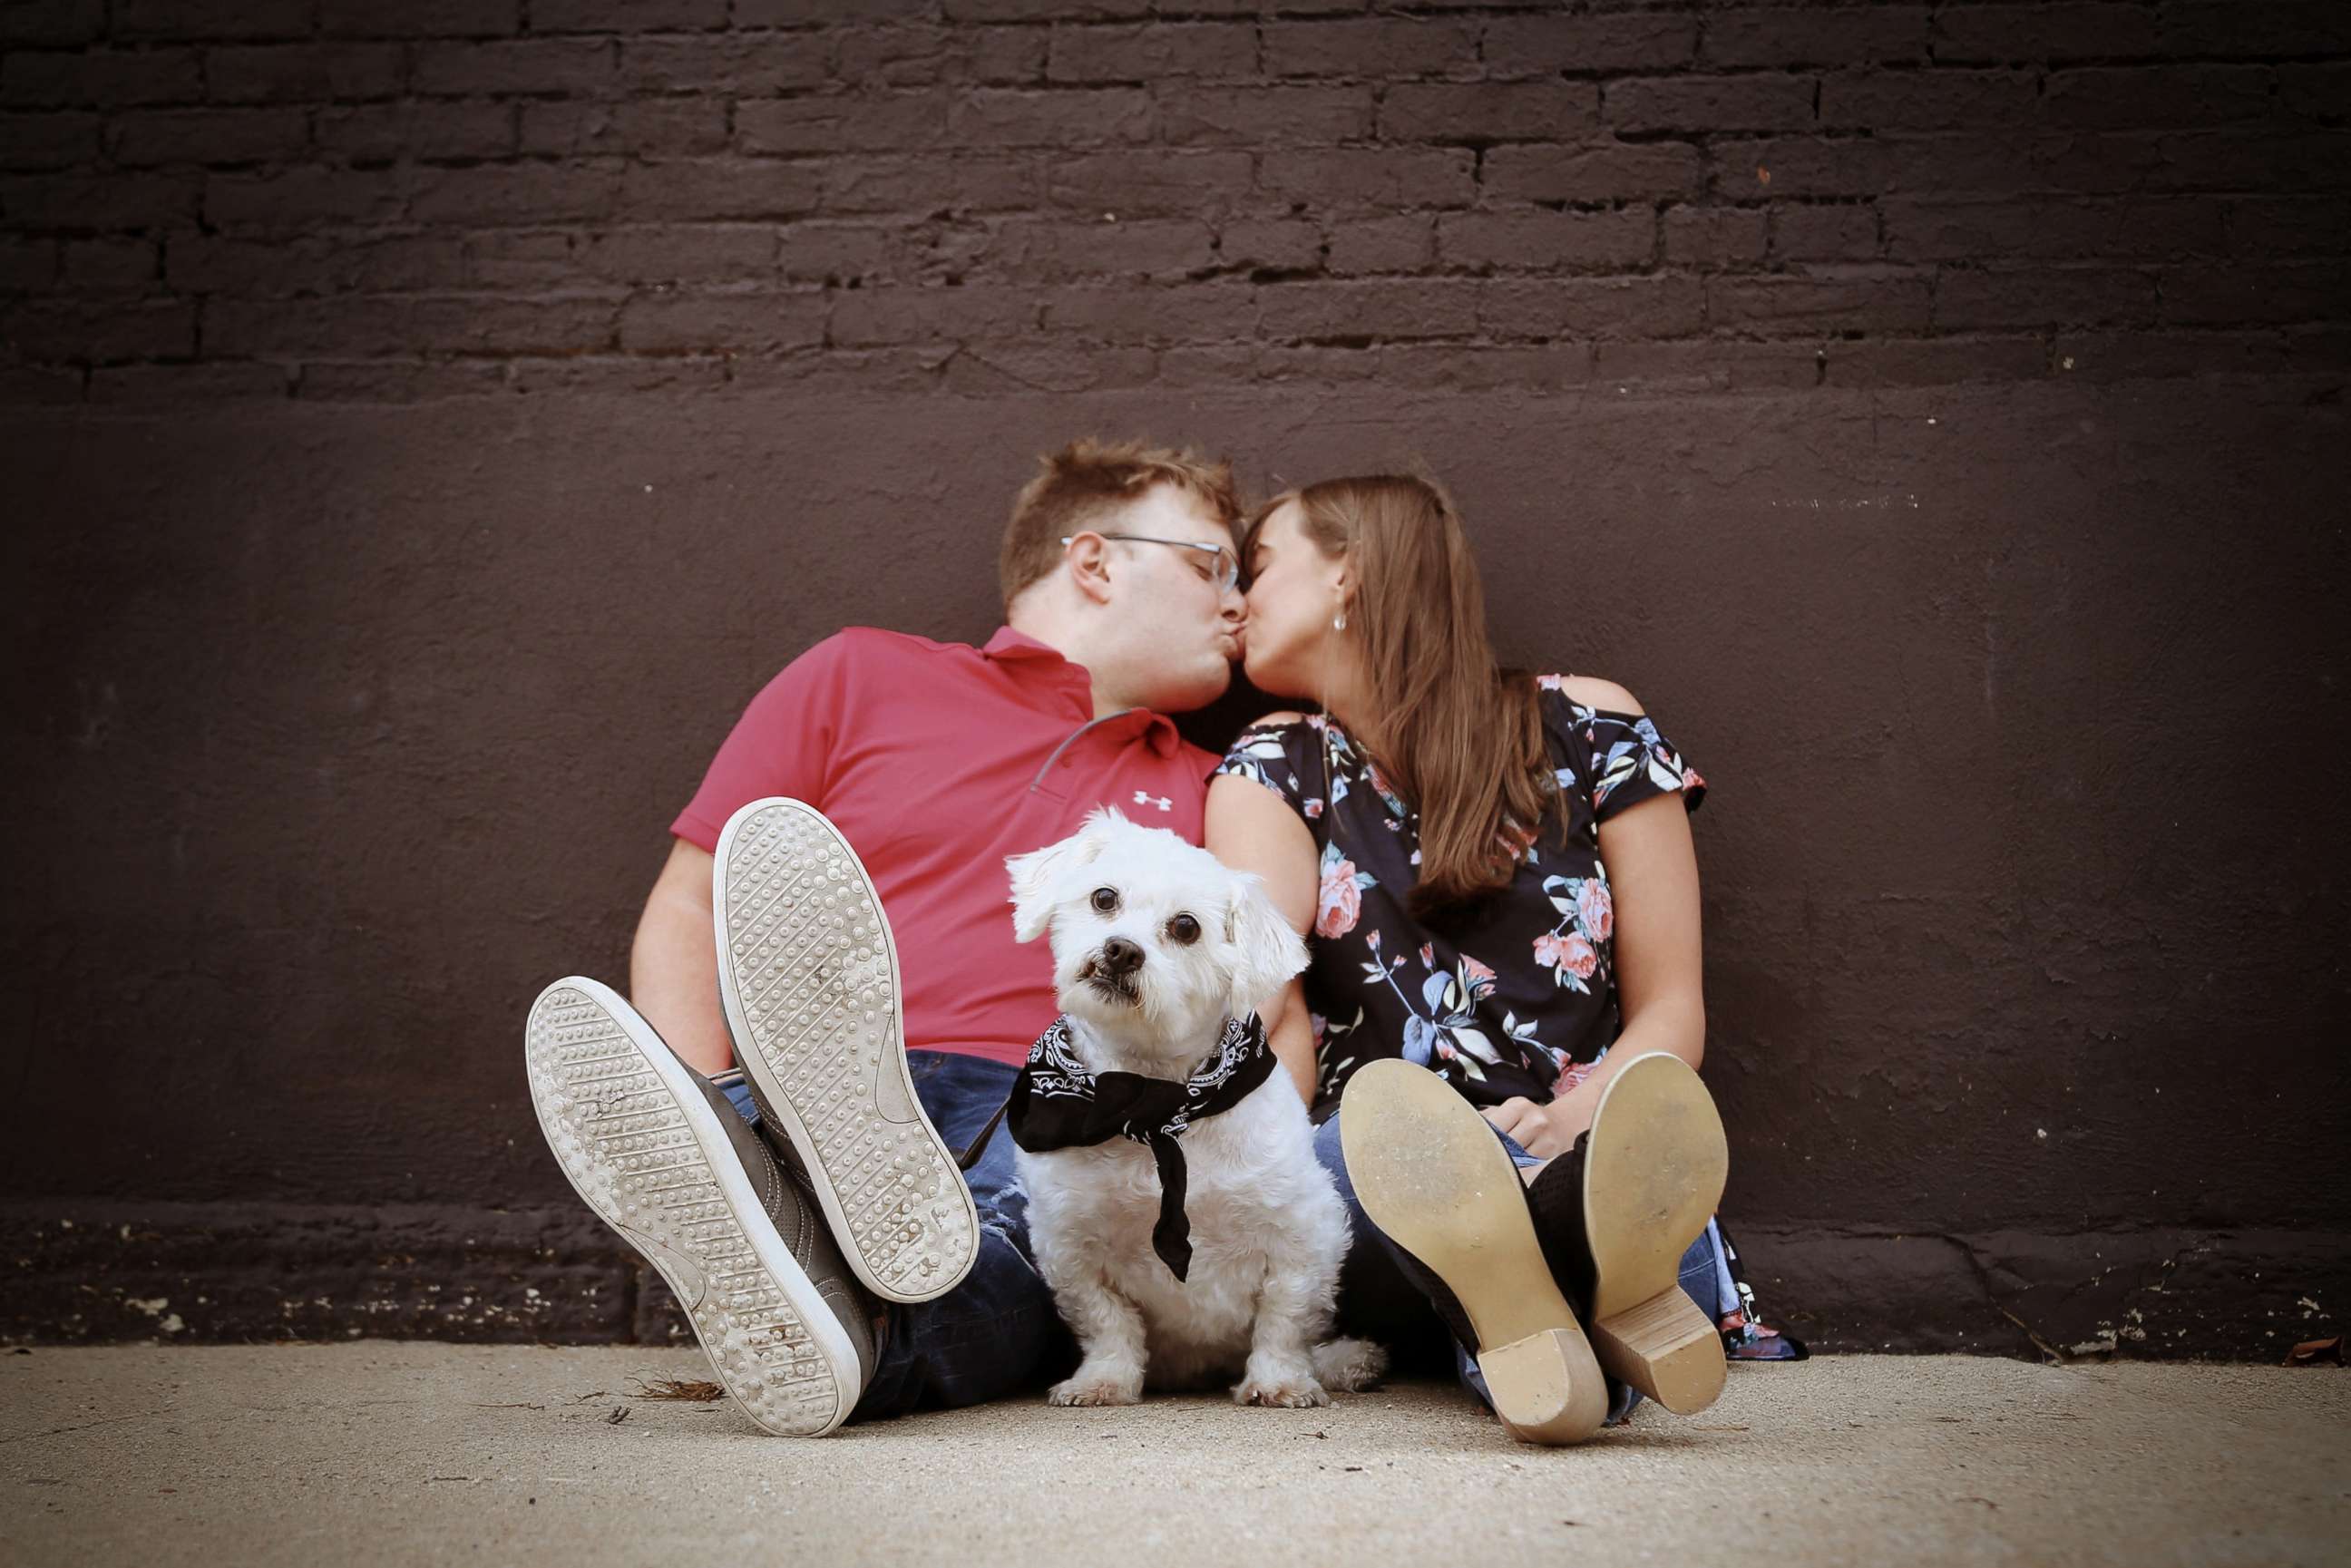 PHOTO: Jared and Chelsea Price decided to have a "newborn" photo shoot with their beloved dog, Riley.